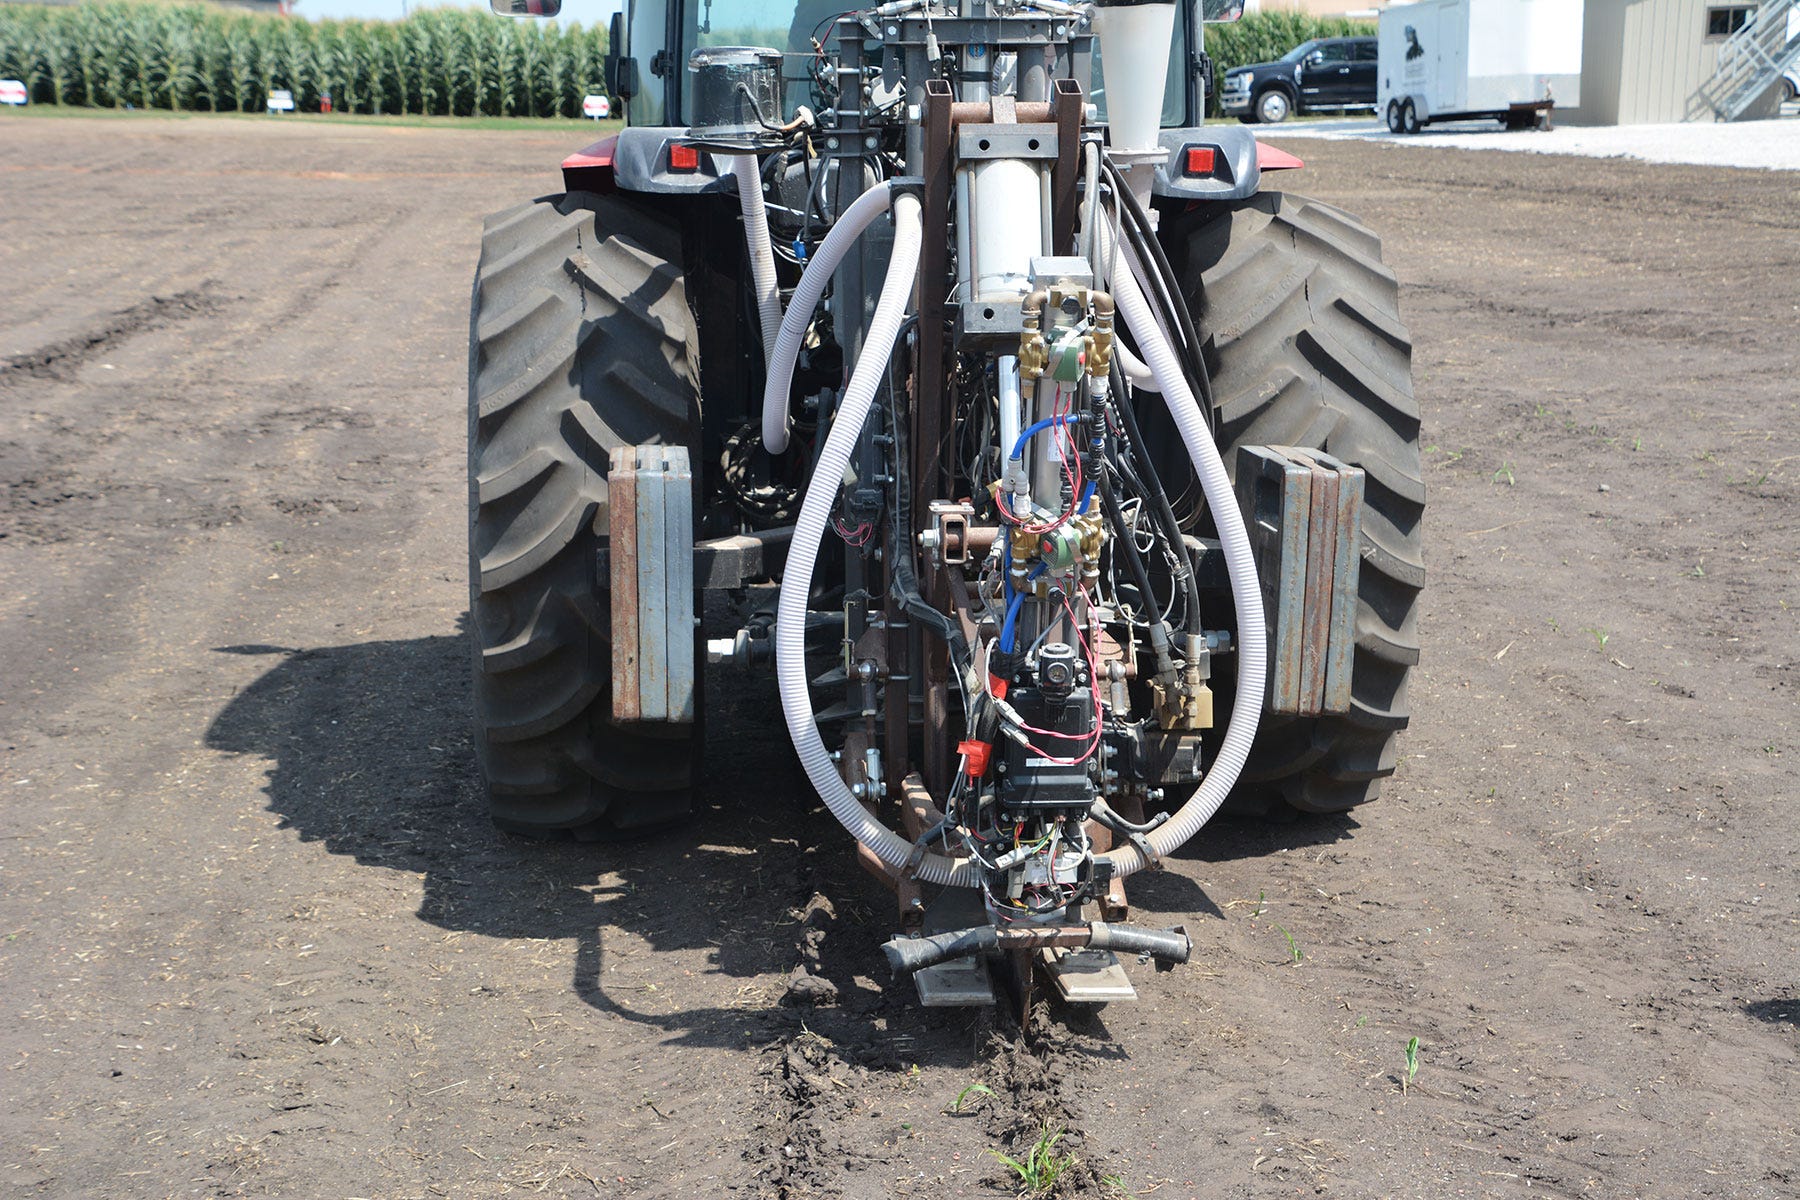 prototype soil sampler mounted on back of tractor